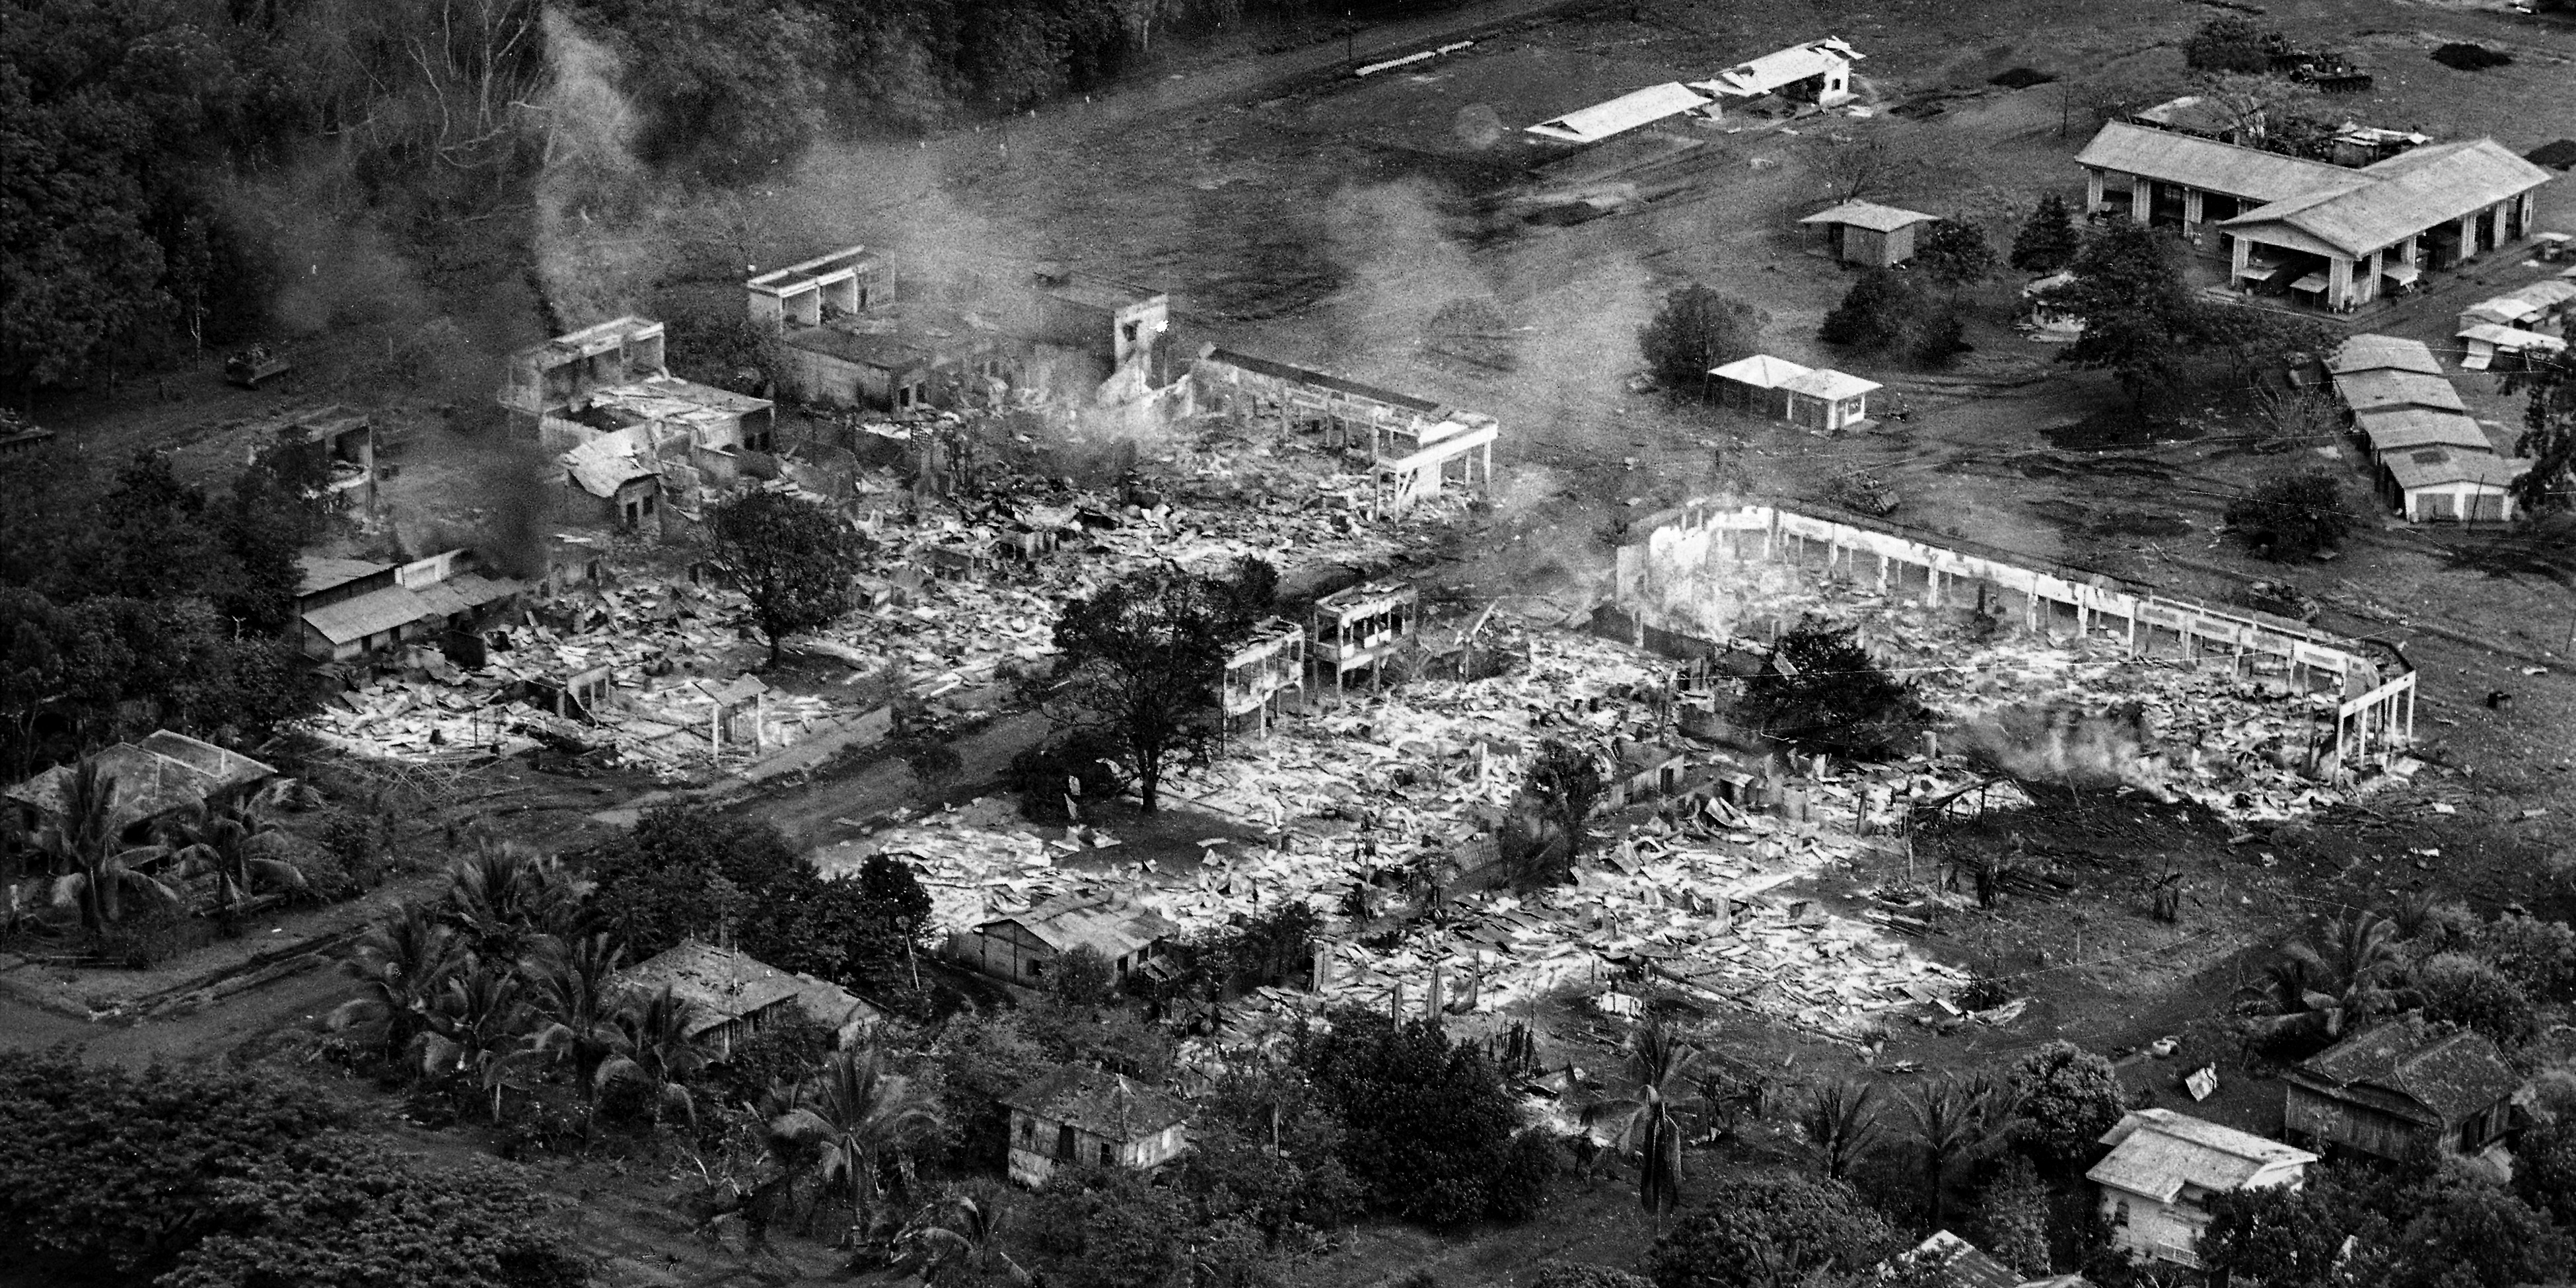 A section of the rubber plantation town of Snoul, Cambodia, smolders in early May 1970, after nearly 90 percent of the town was destroyed in air strikes and heavy fighting between U.S. forces and North Vietnamese troops. By May 6, the U.S. 11th Armored Cavalry Regiment occupied the town. (AP Photo/Henri Huet)